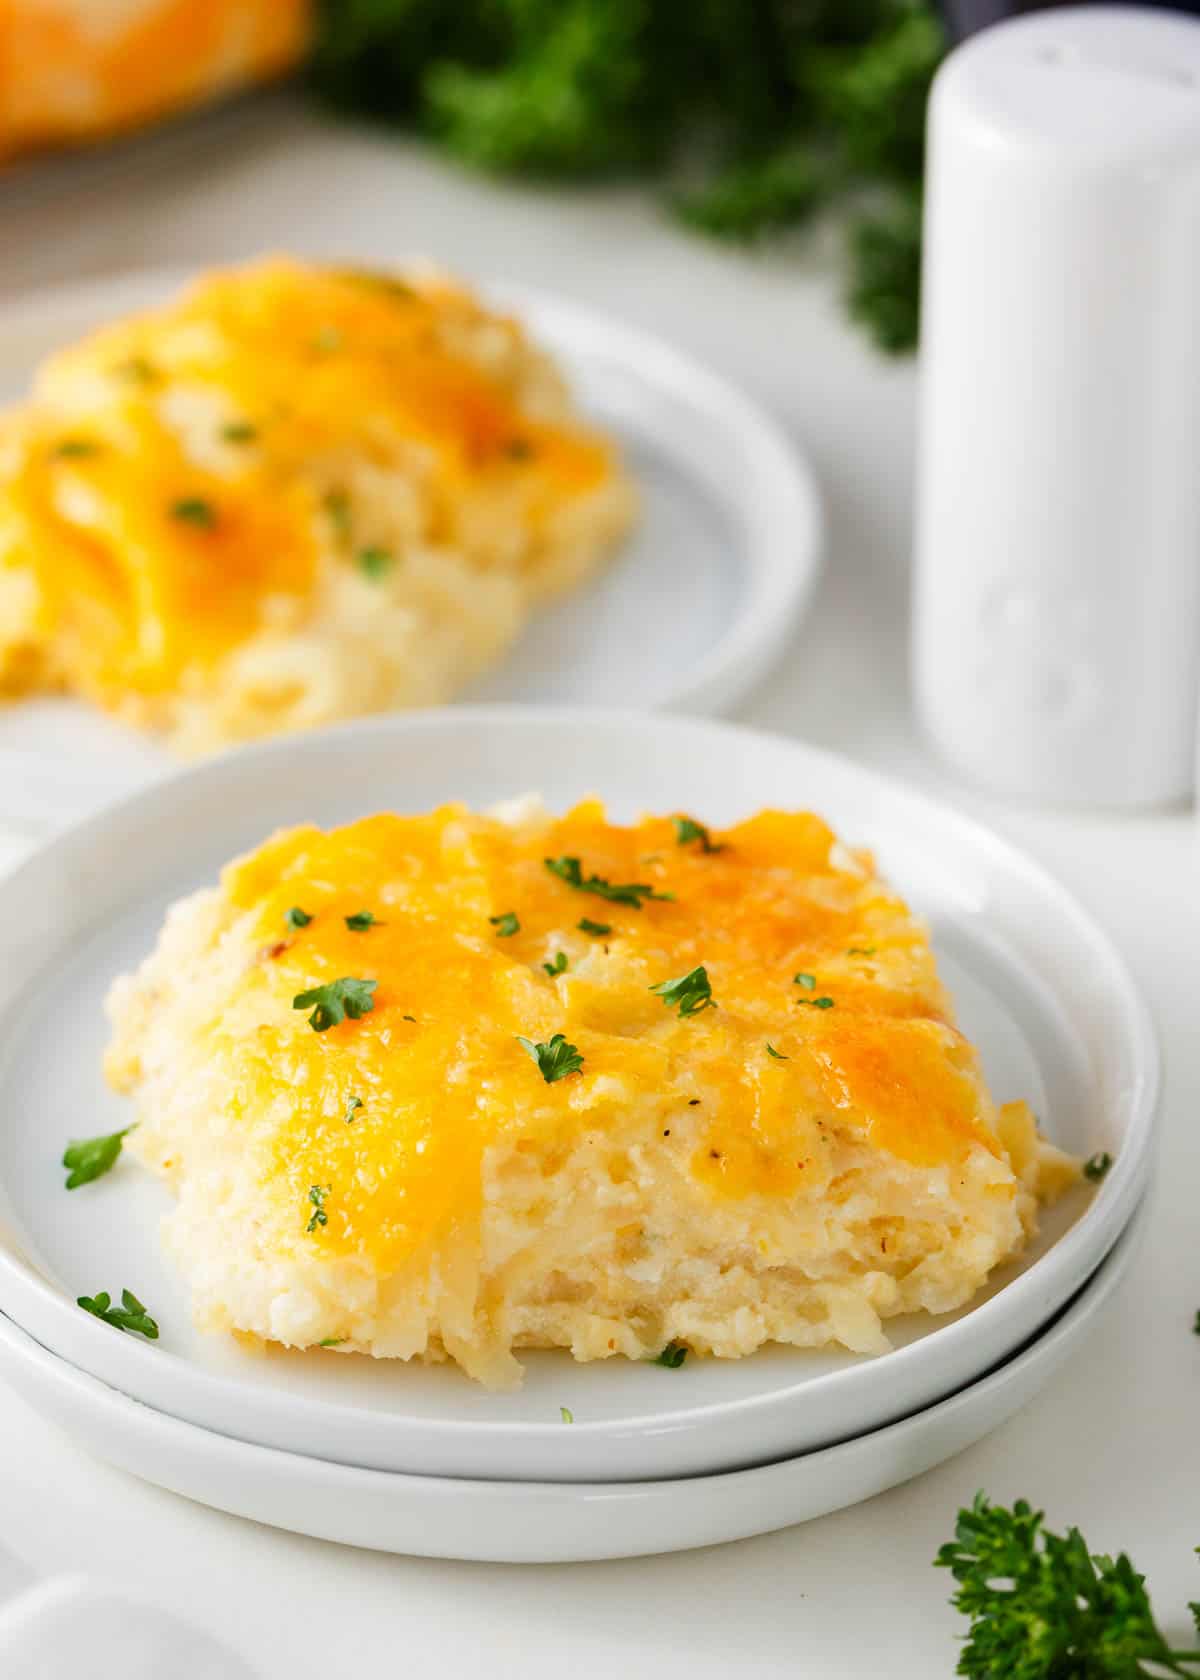 Hashbrown casserole on a white plate.